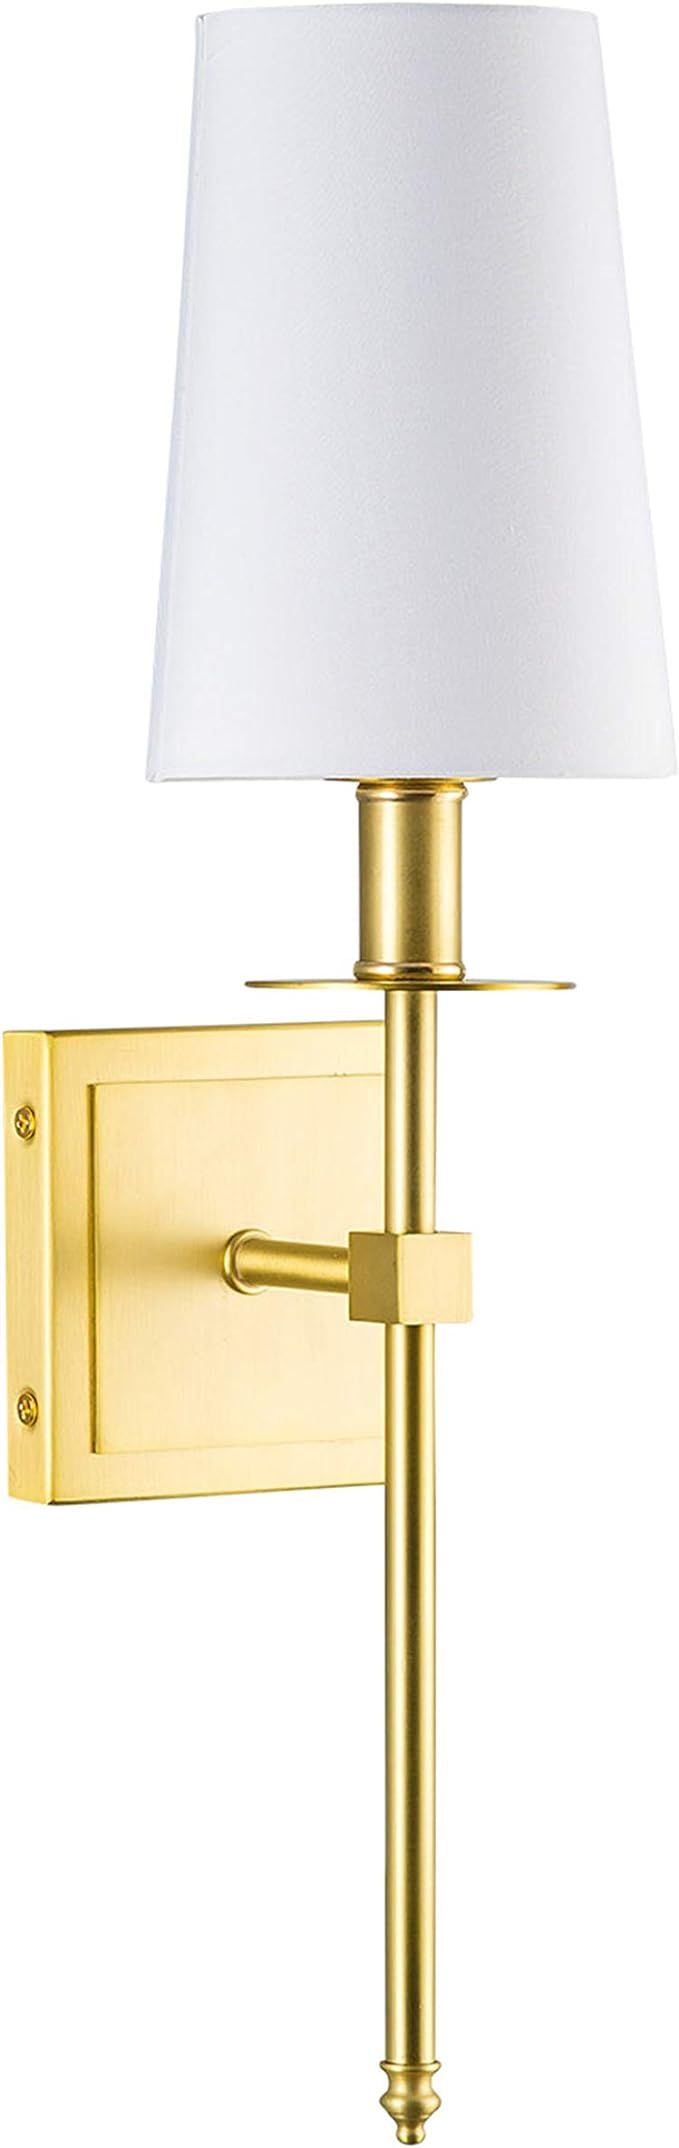 Torcia Sconce Brushed Brass One-Light Fixture with Fabric Shade - Hardwire Wall Mount Lighting - ... | Amazon (CA)